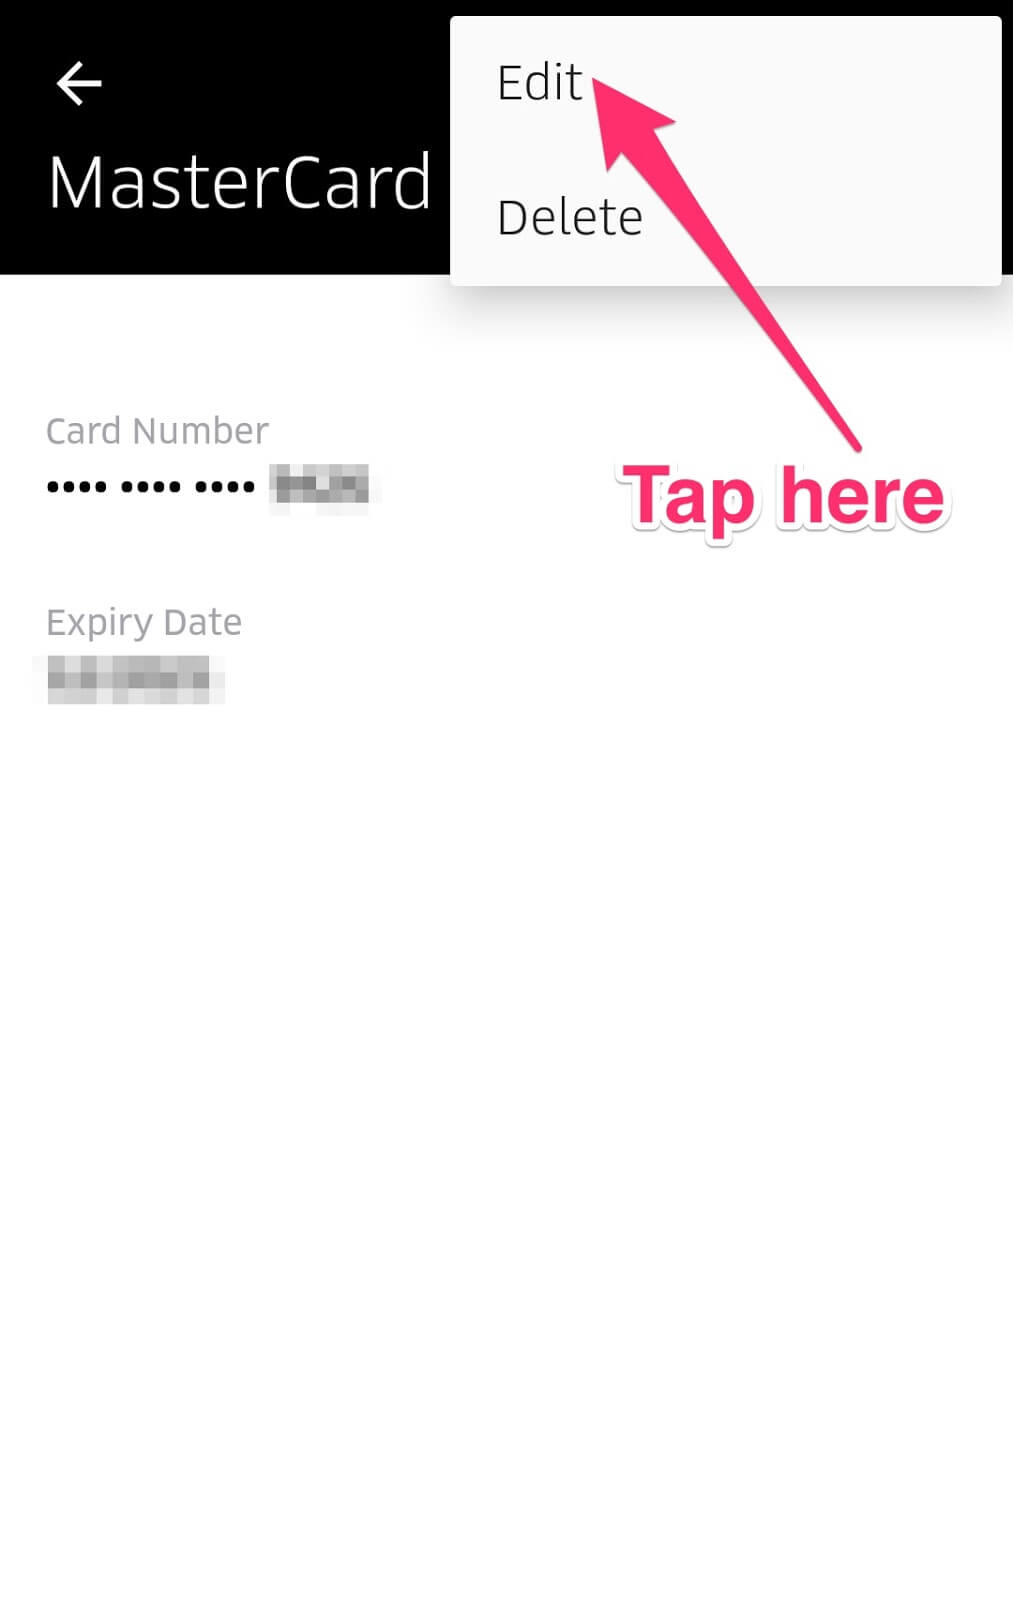 How to Remove Your Credit Card from Uber: tap edit